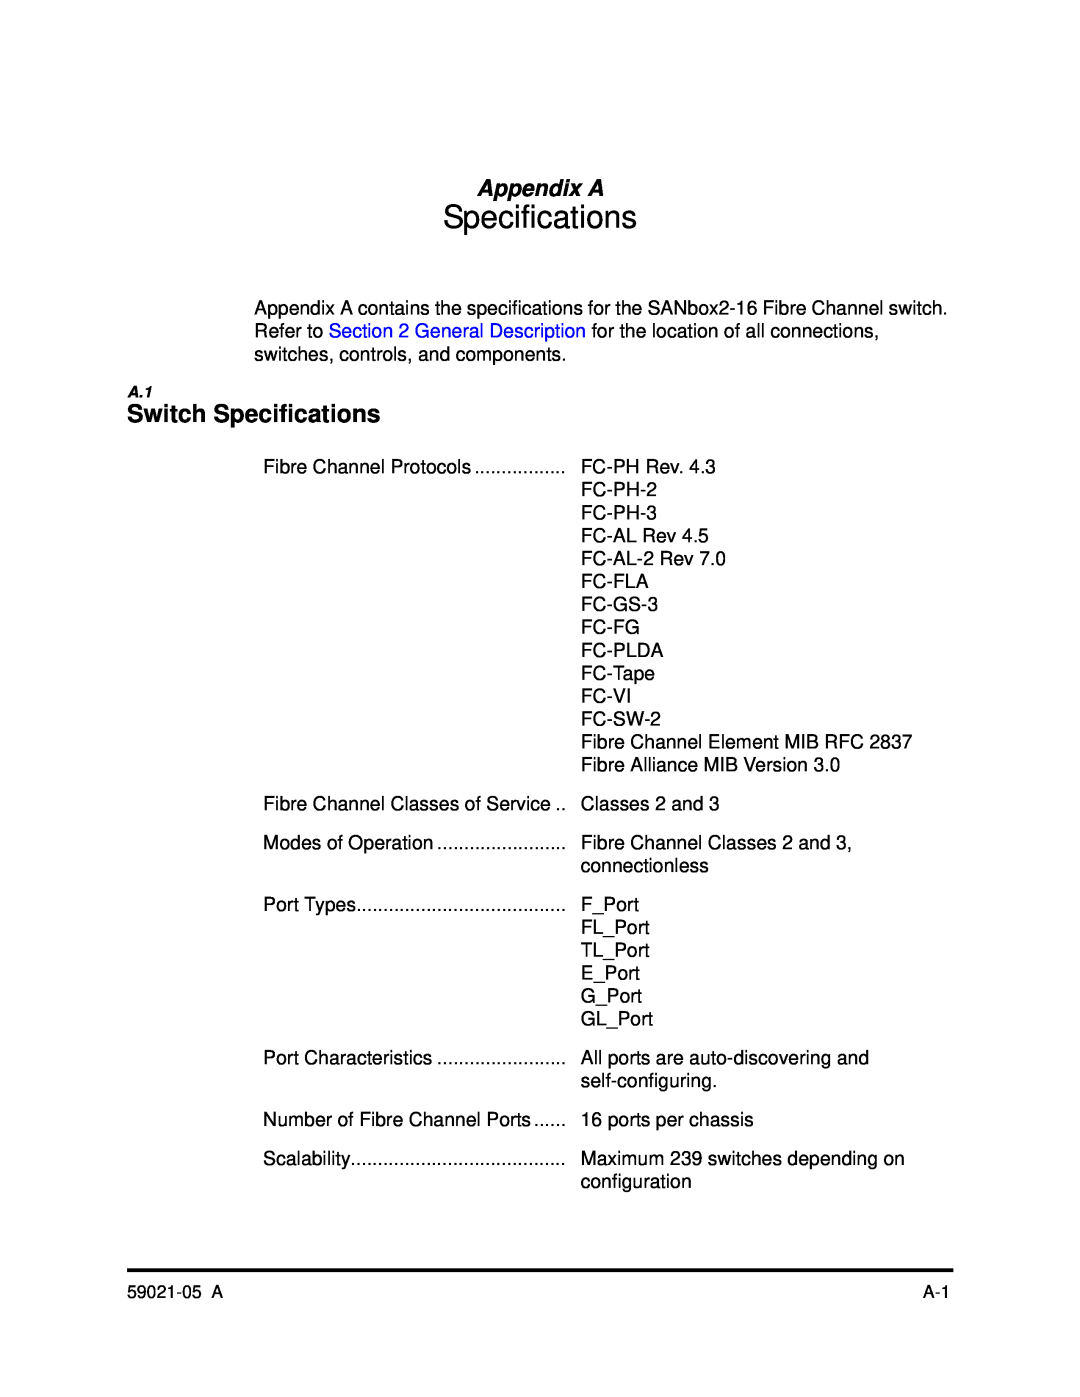 Q-Logic 59021-05 manual Switch Specifications, Appendix A 